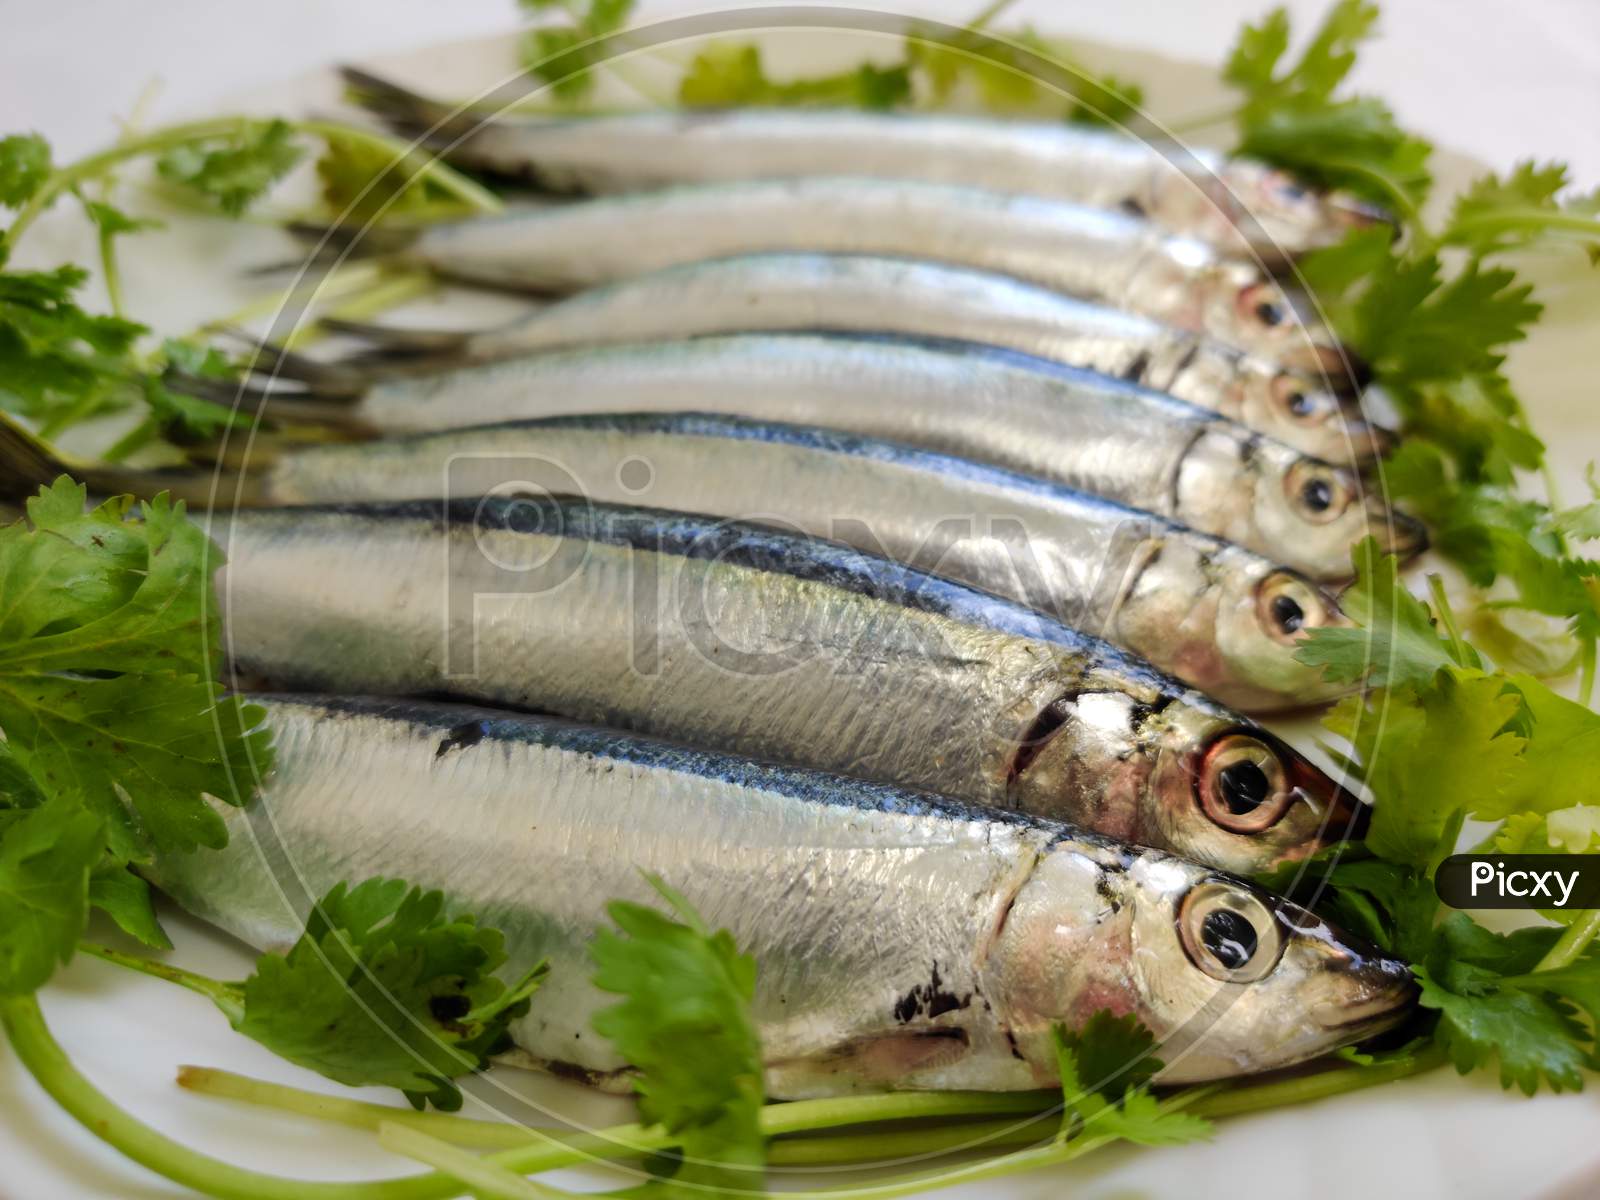 Closeup View Of Slender Rainbow Sardines Decorated With Curry Leaves On A White Plate.